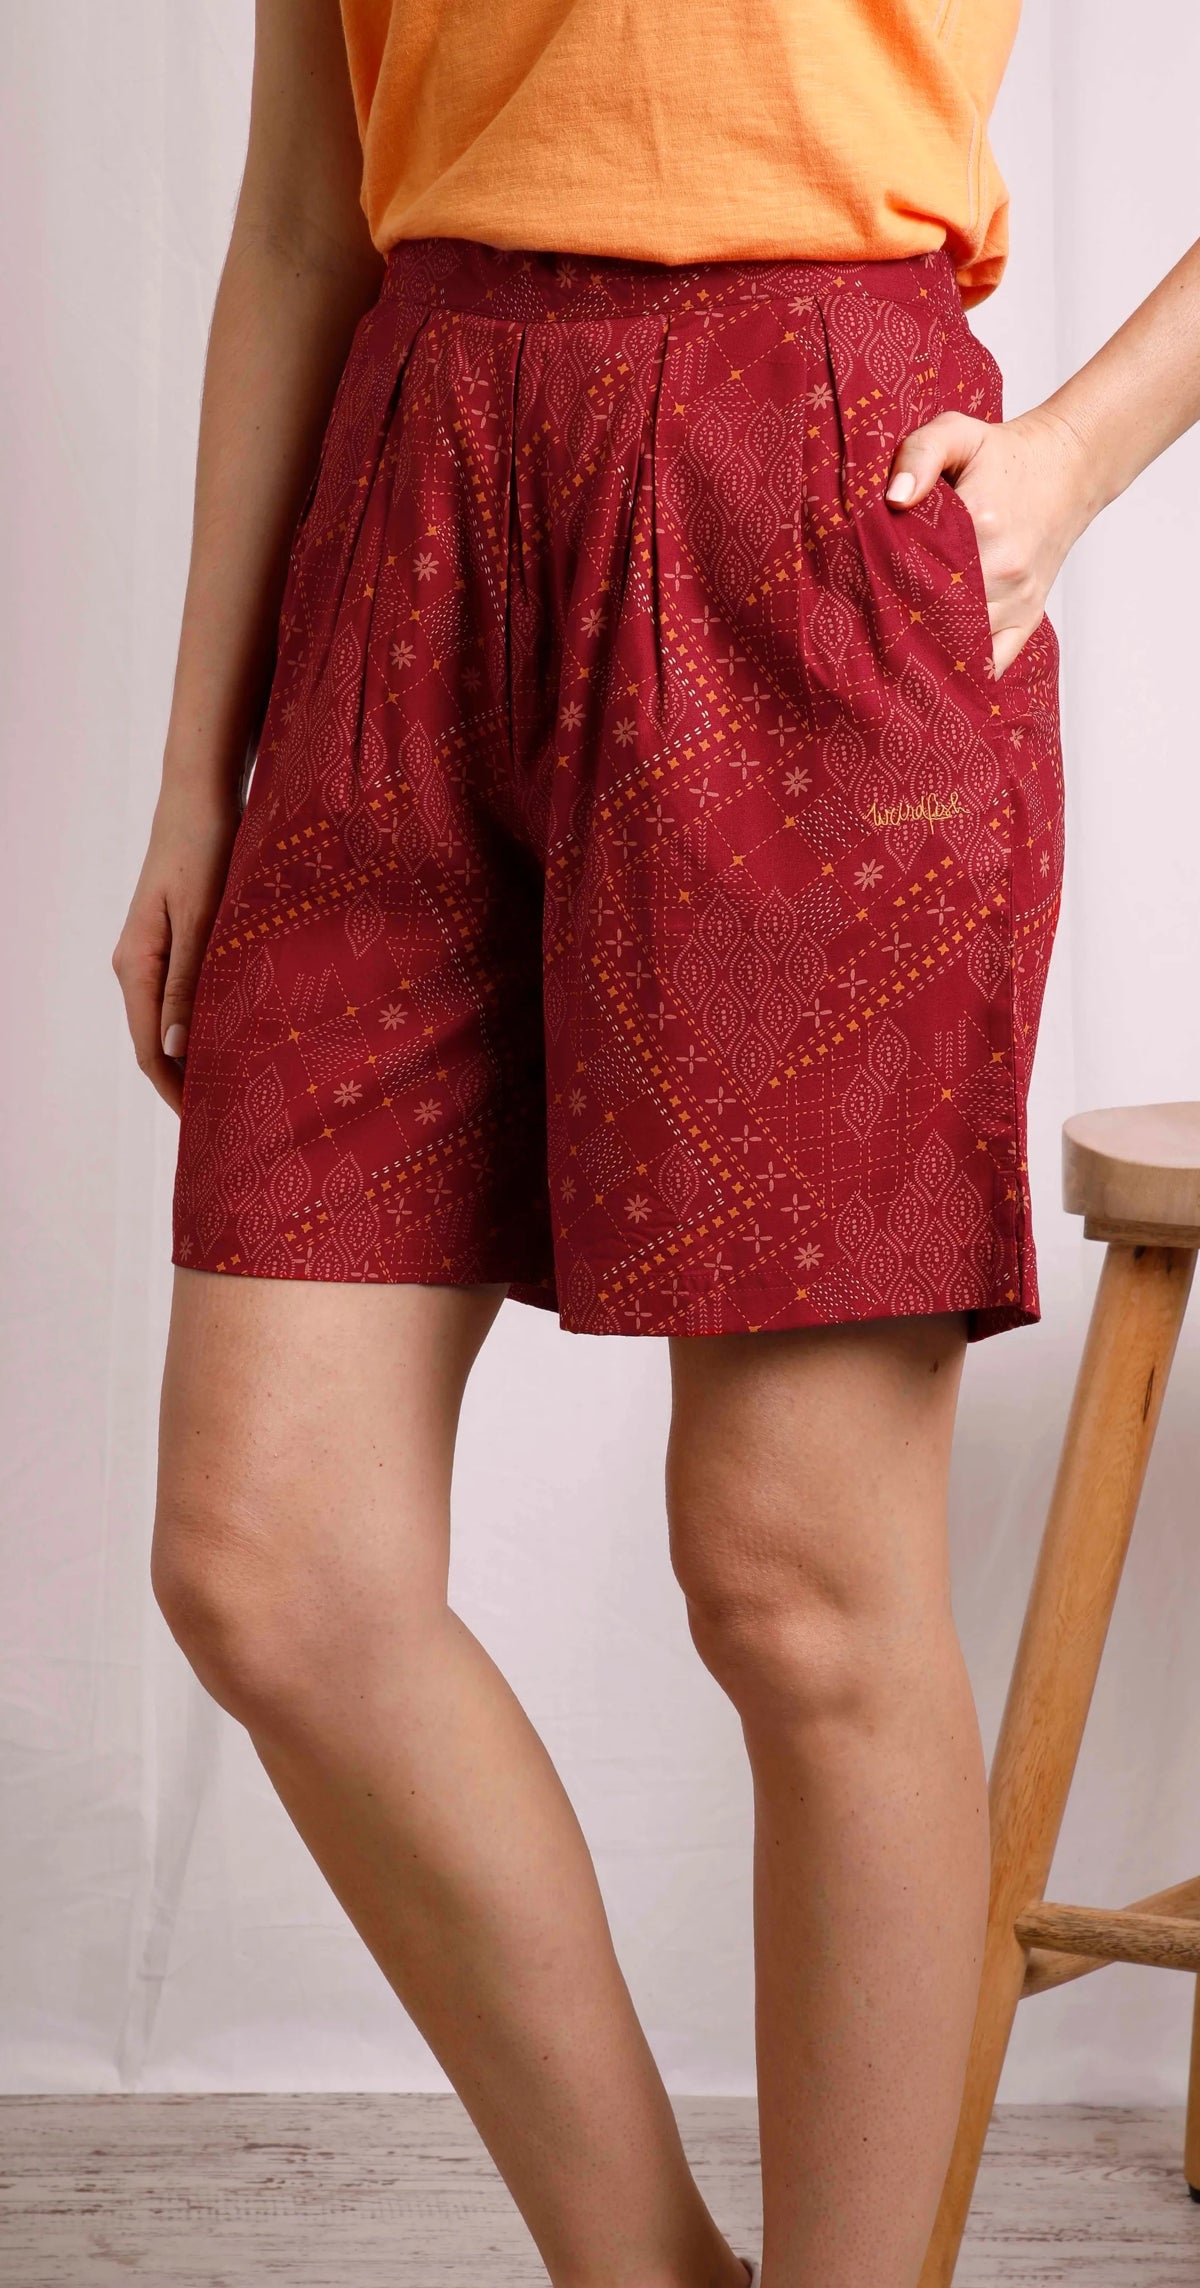 Women's Chilli Red viscose Sundance shorts from Weird Fish with Moroccan style print, elasticated waist and hip pockets.